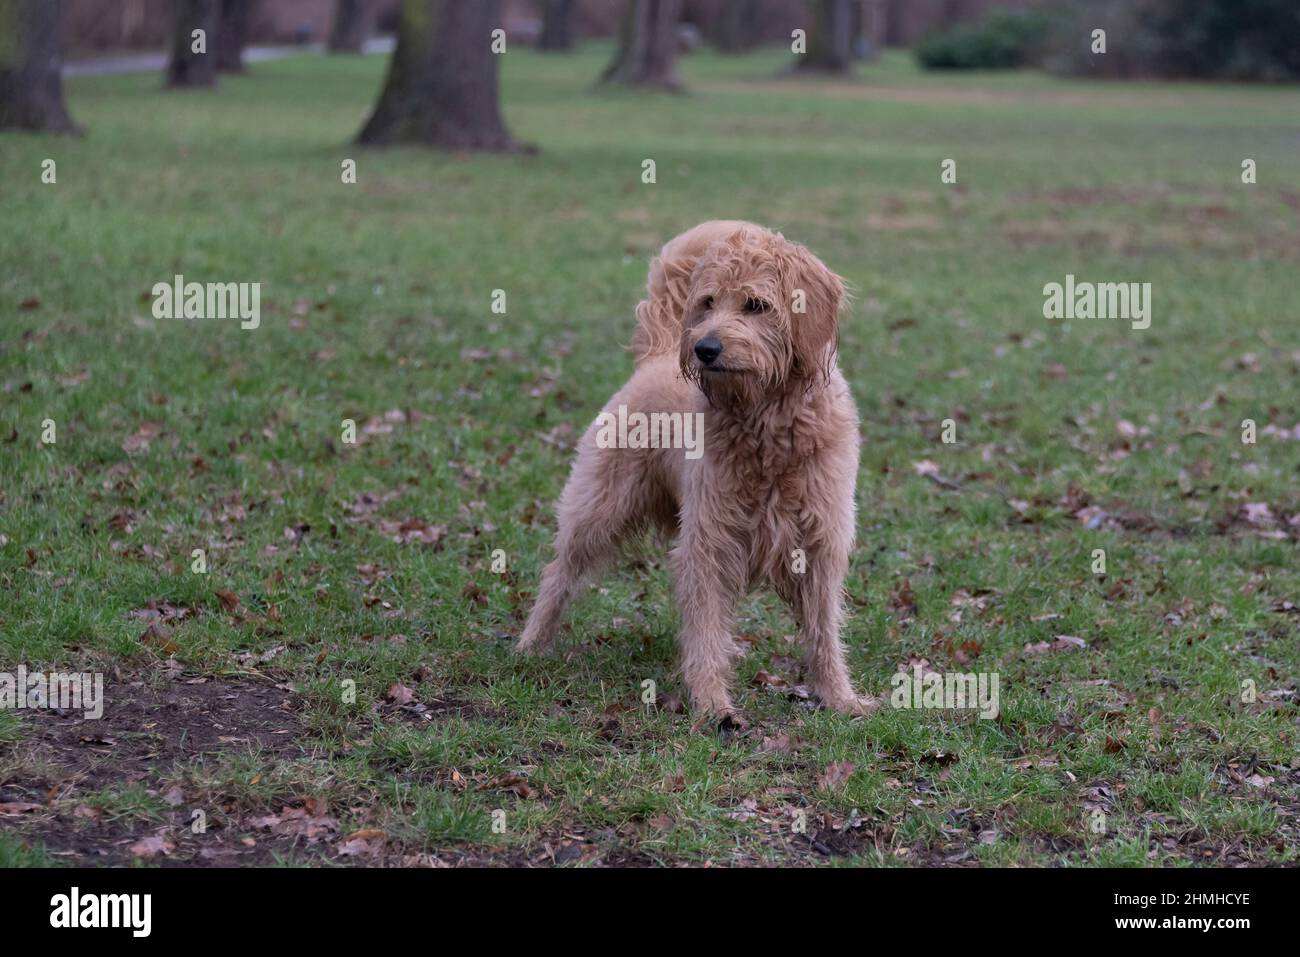 A dog (Goldendoodle) is playing with a stick in a meadow. Stock Photo